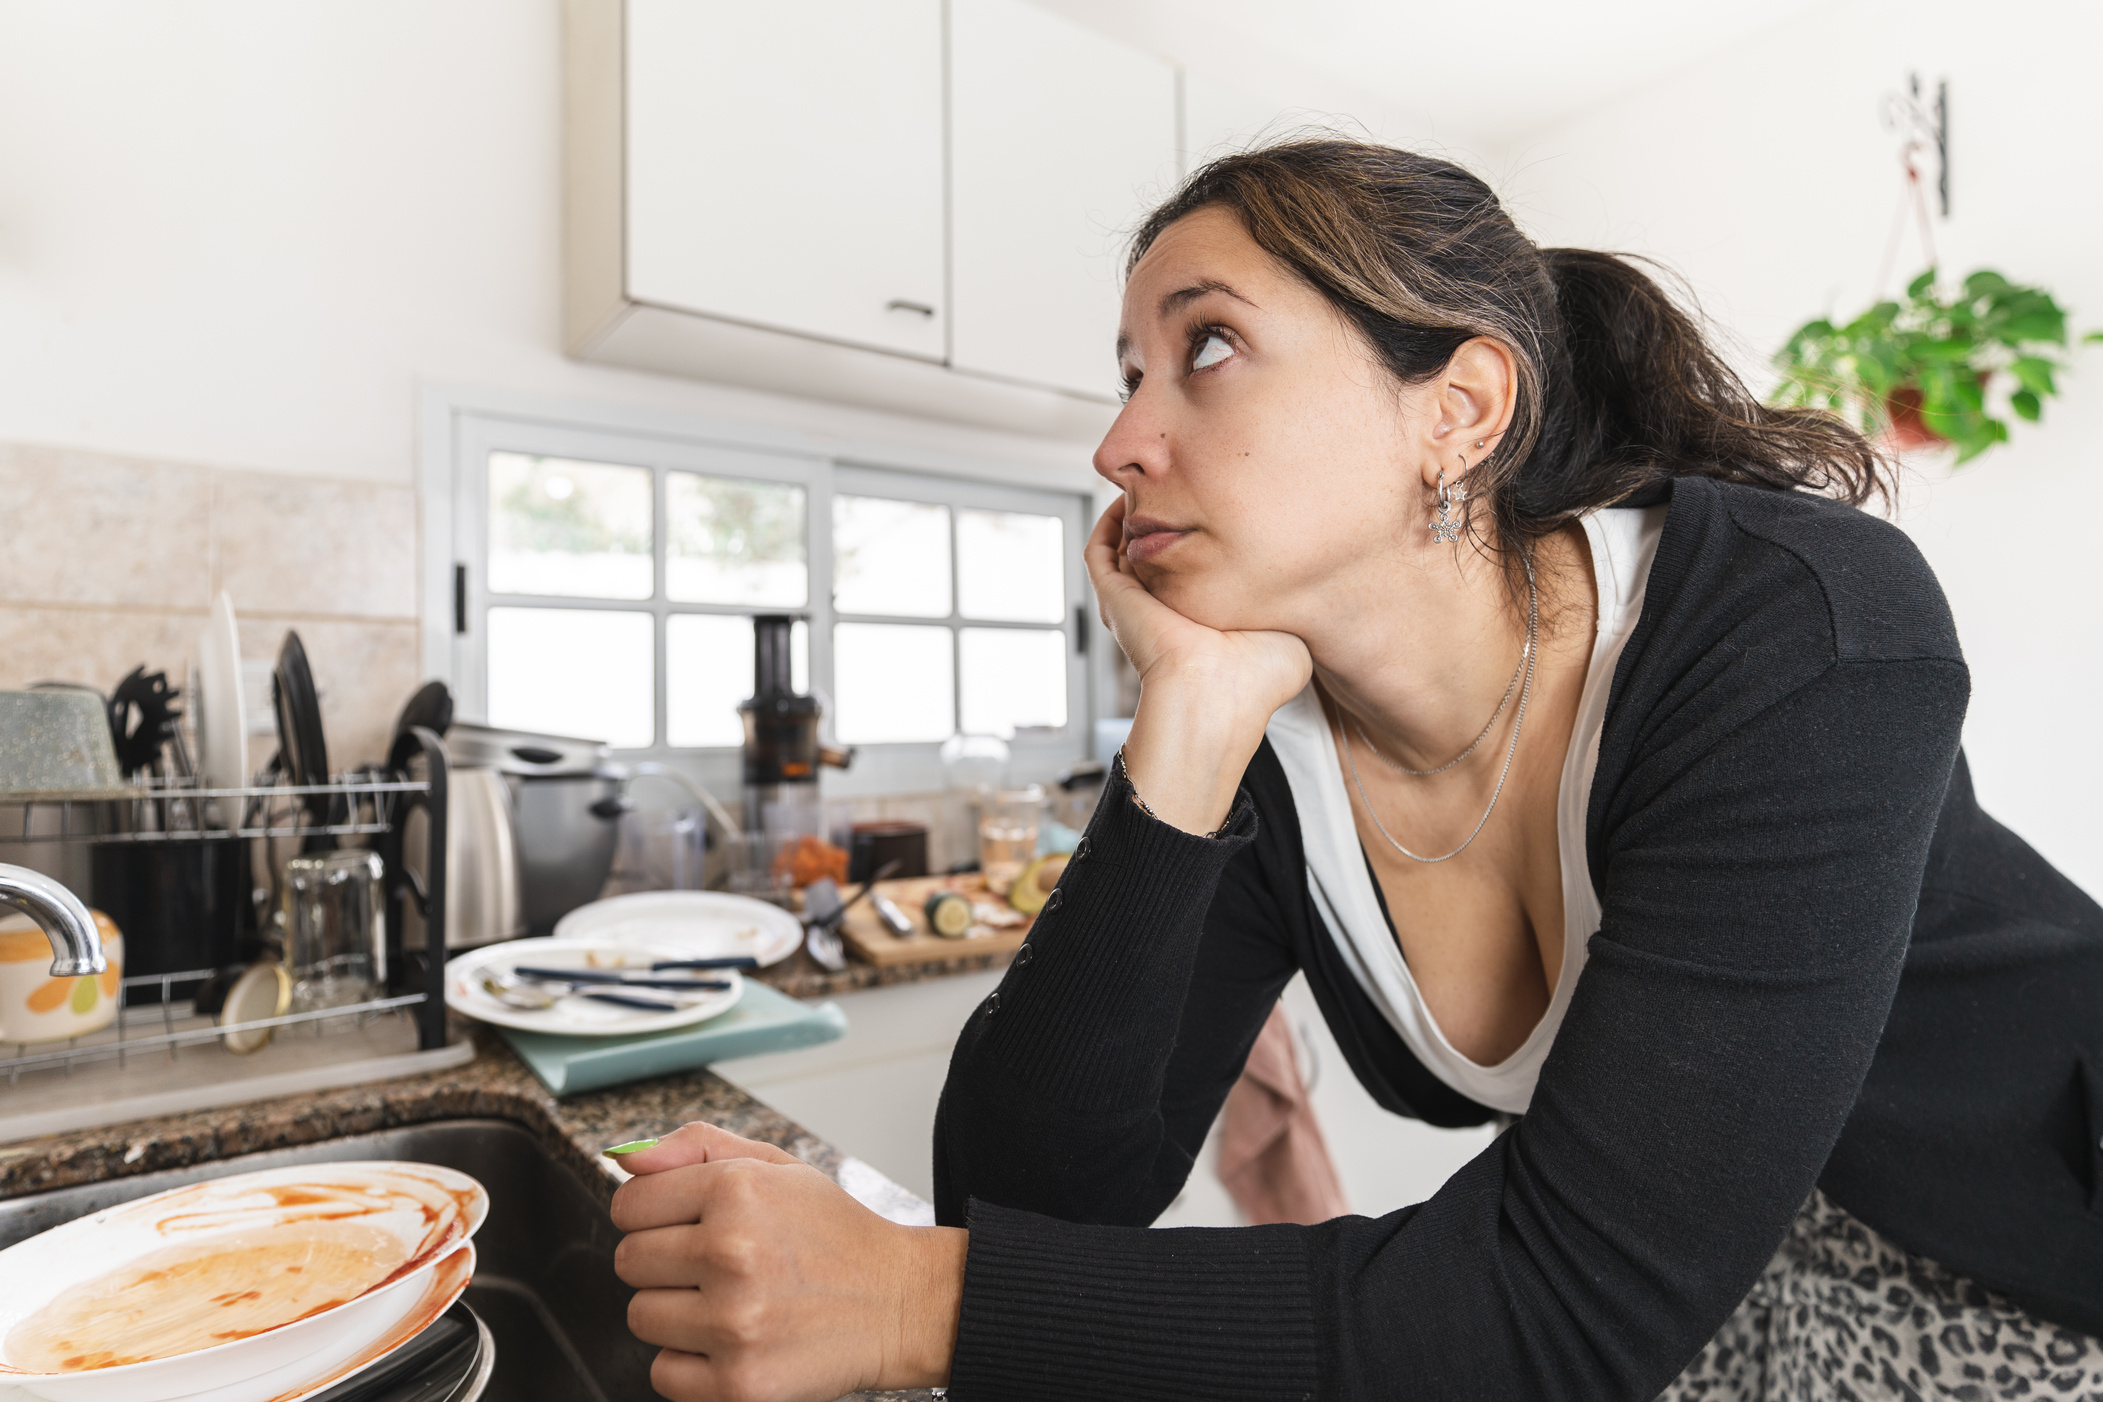 Latin woman worried about her messy kitchen